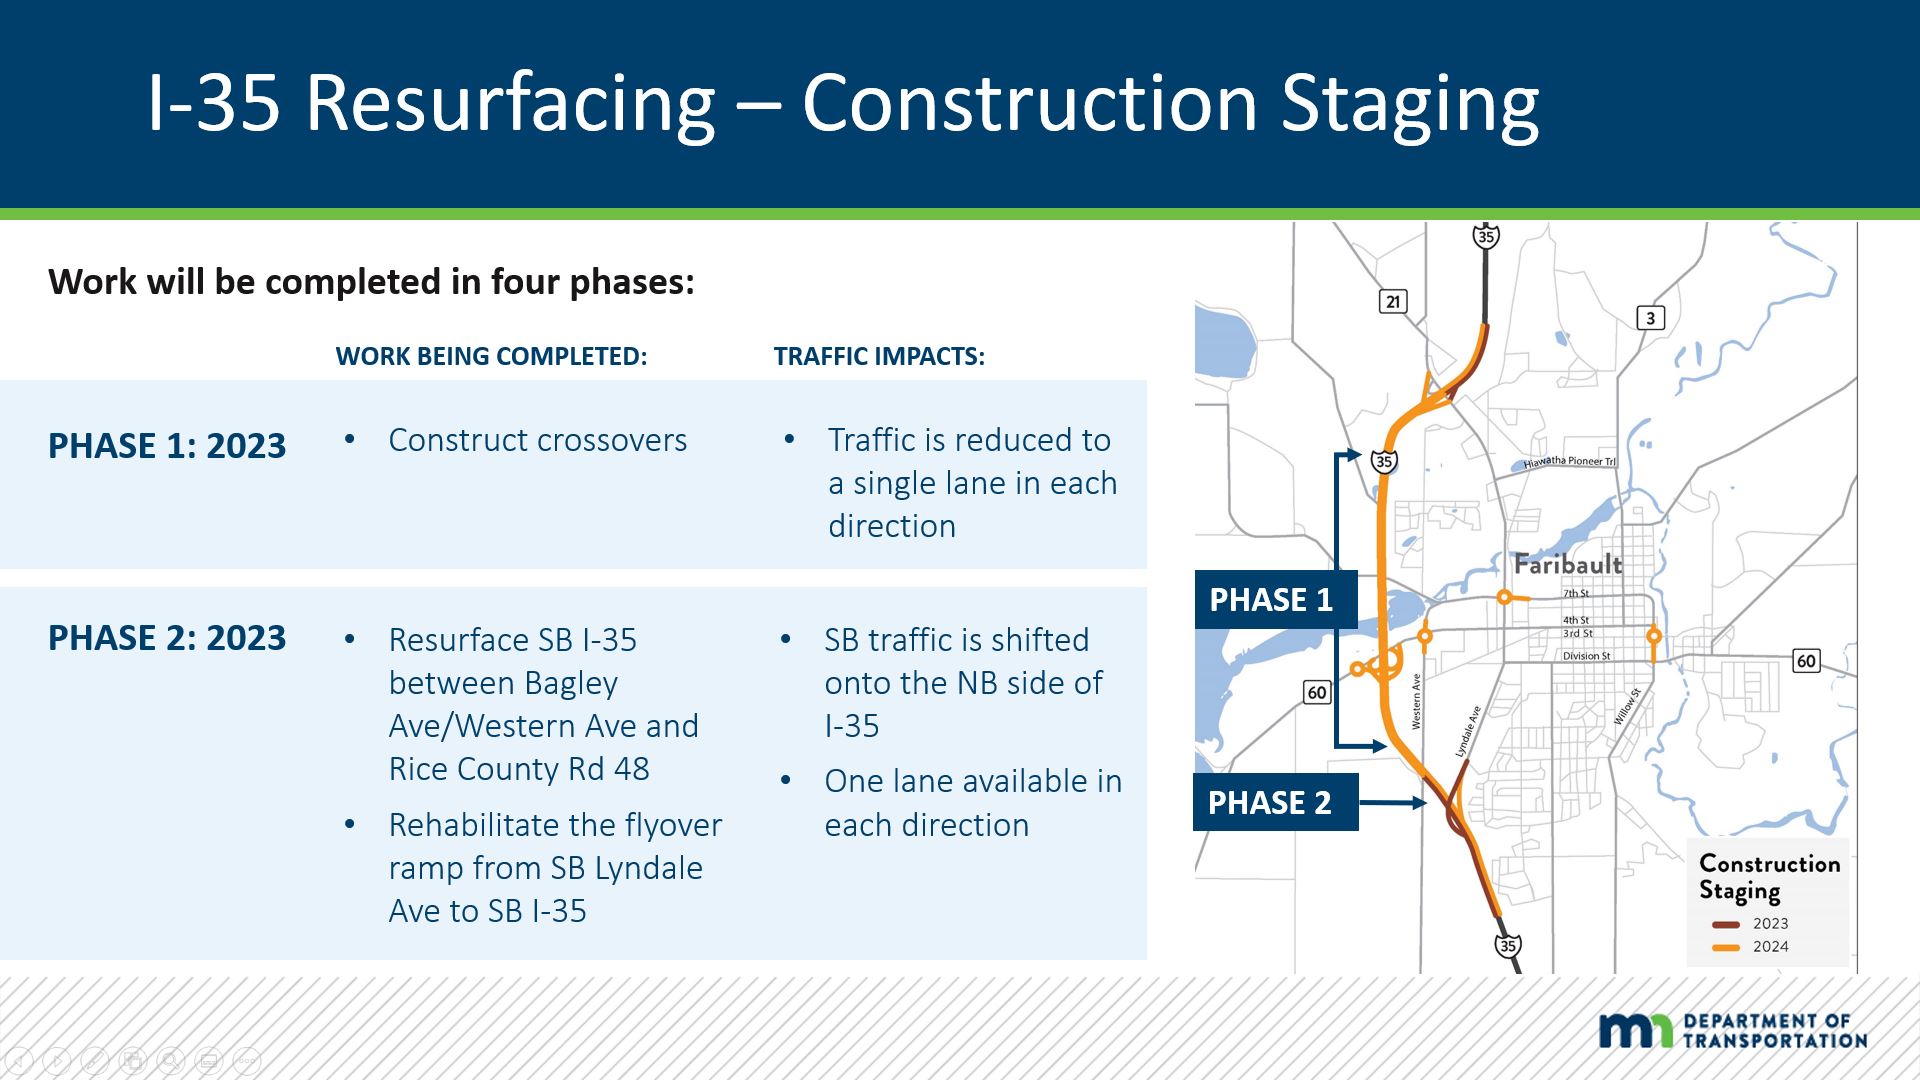 I-35 project description of Phase 1 and 2